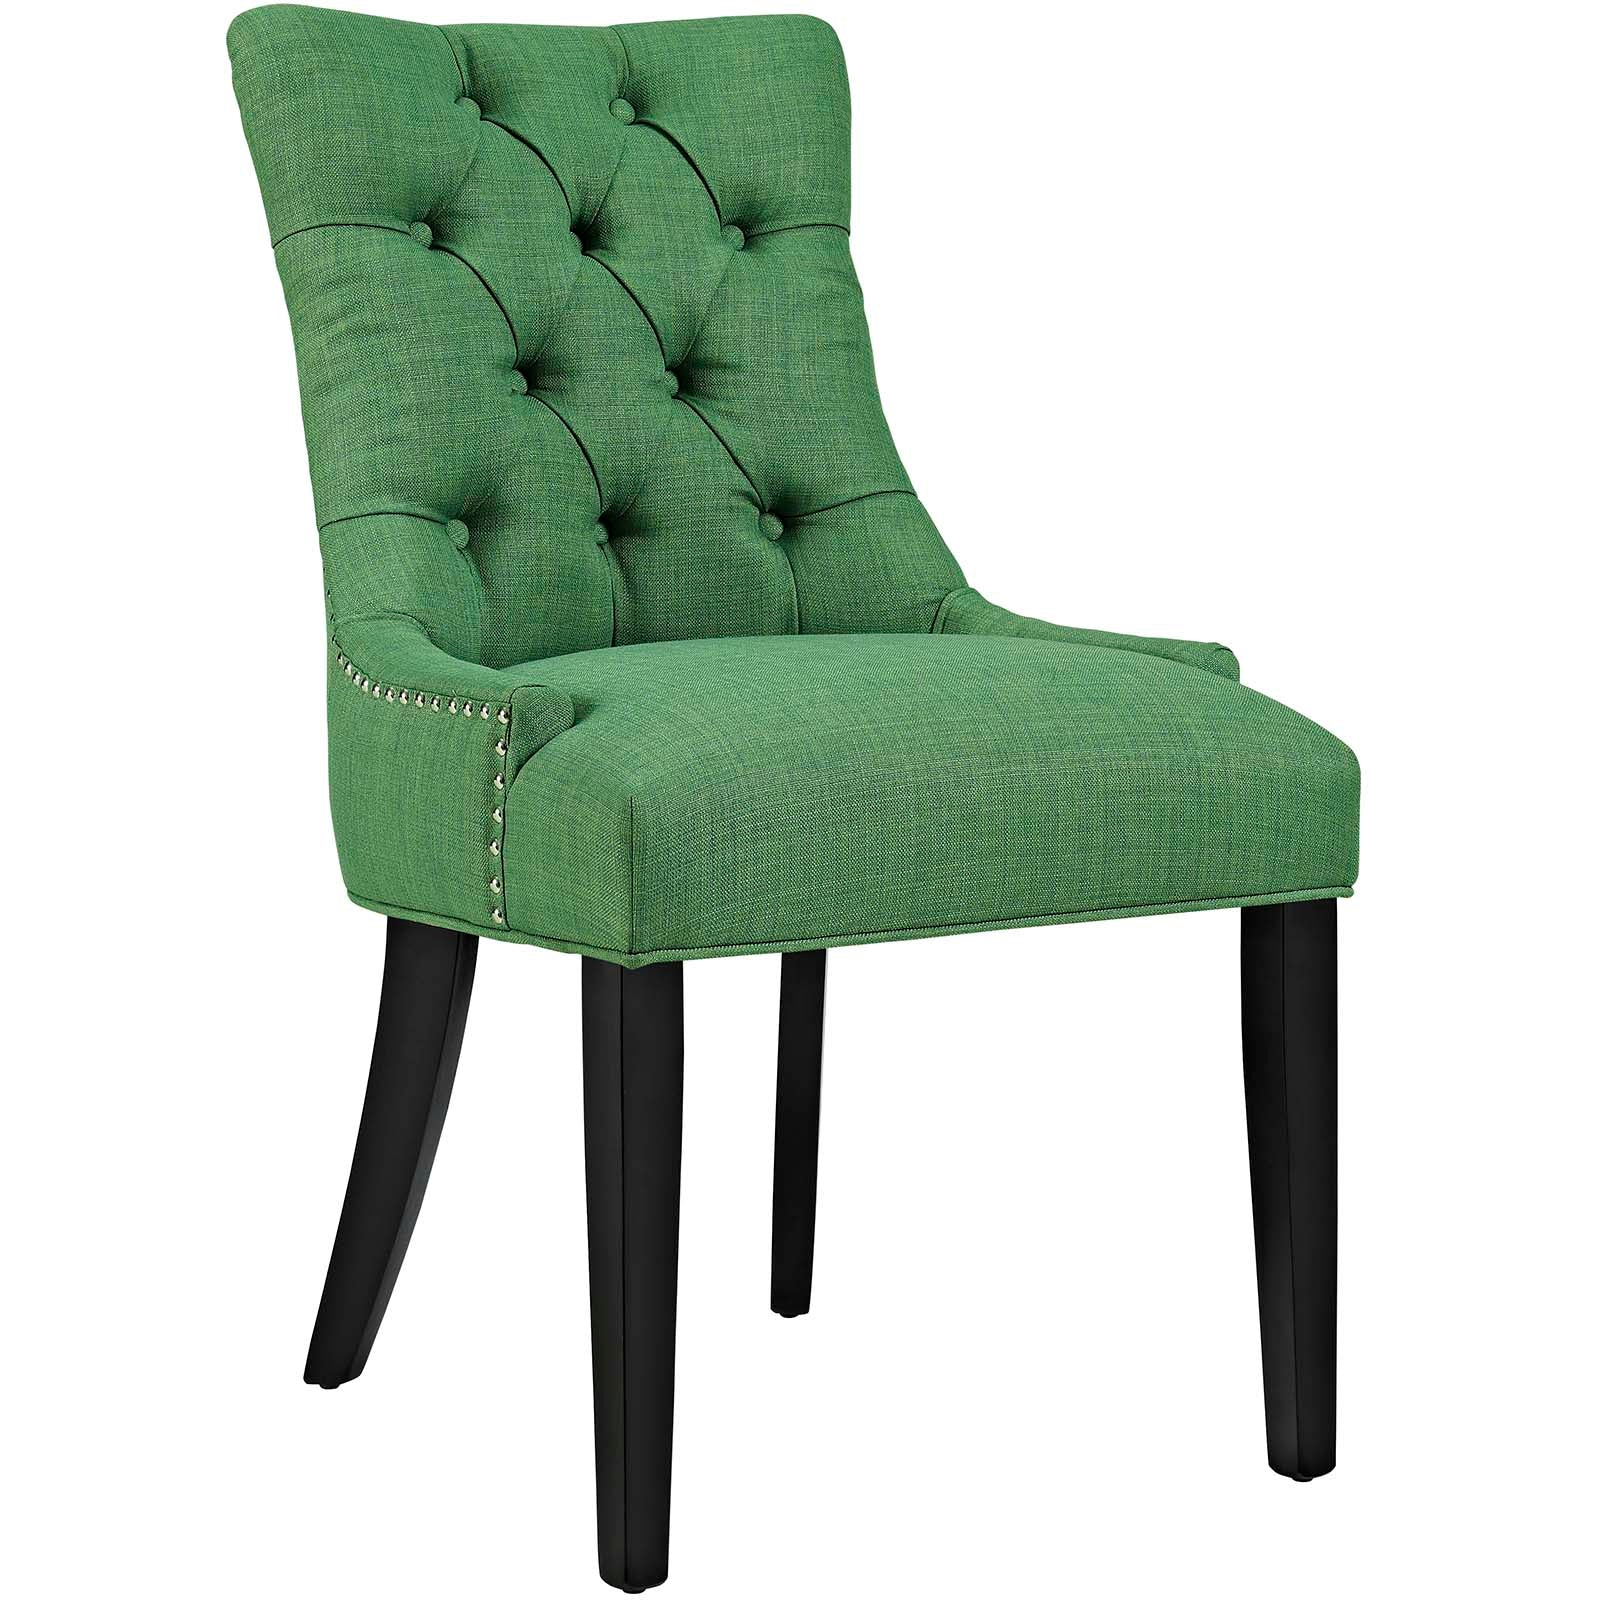 Regent Tufted Fabric Dining Side Chair - East Shore Modern Home Furnishings